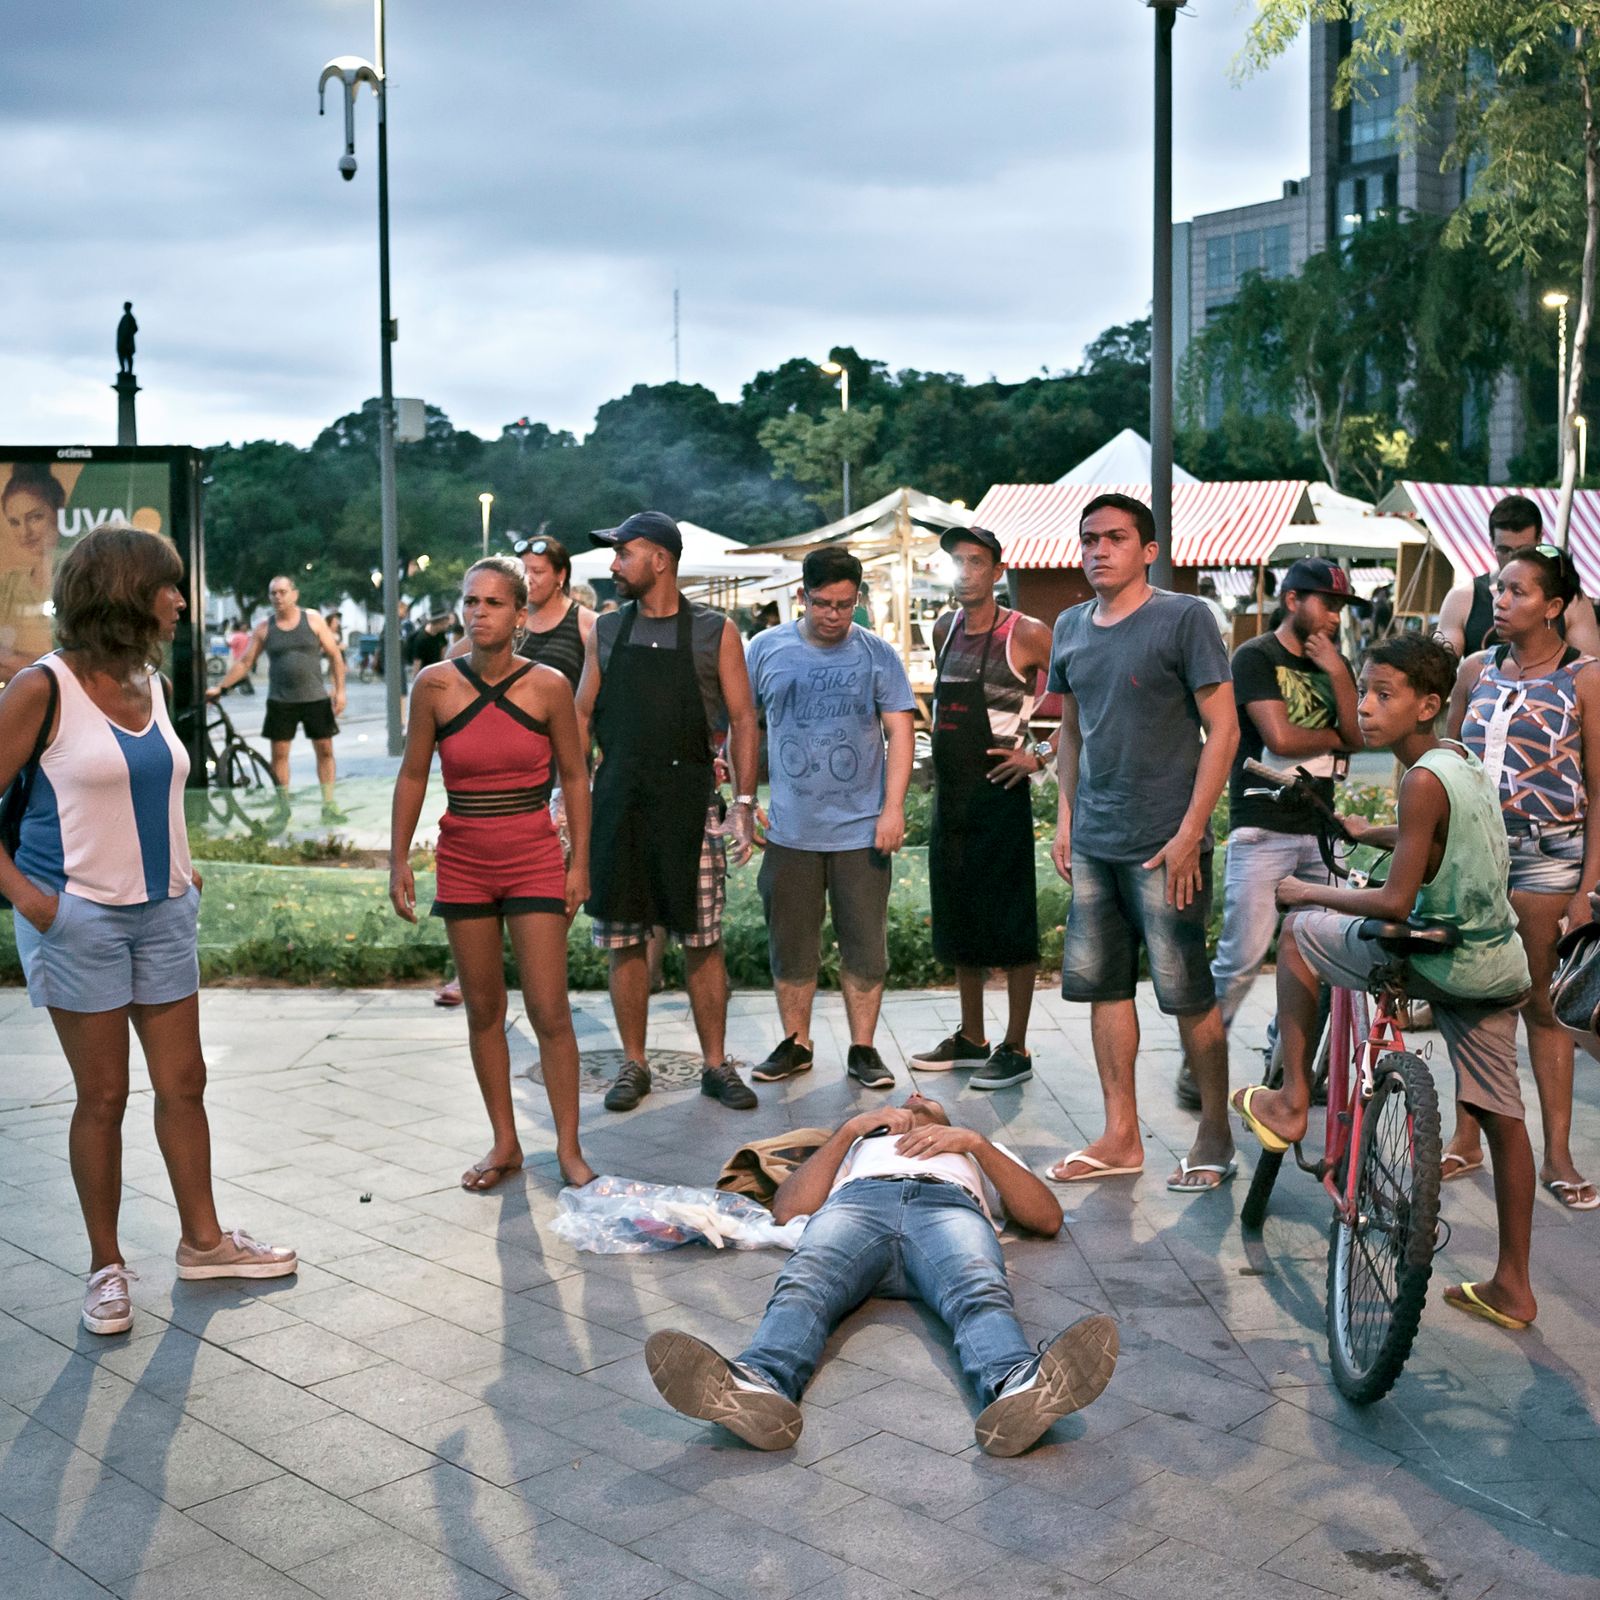 © Lara Ciarabellini - Image from the Urban Rio: life in between beaches and favelas photography project